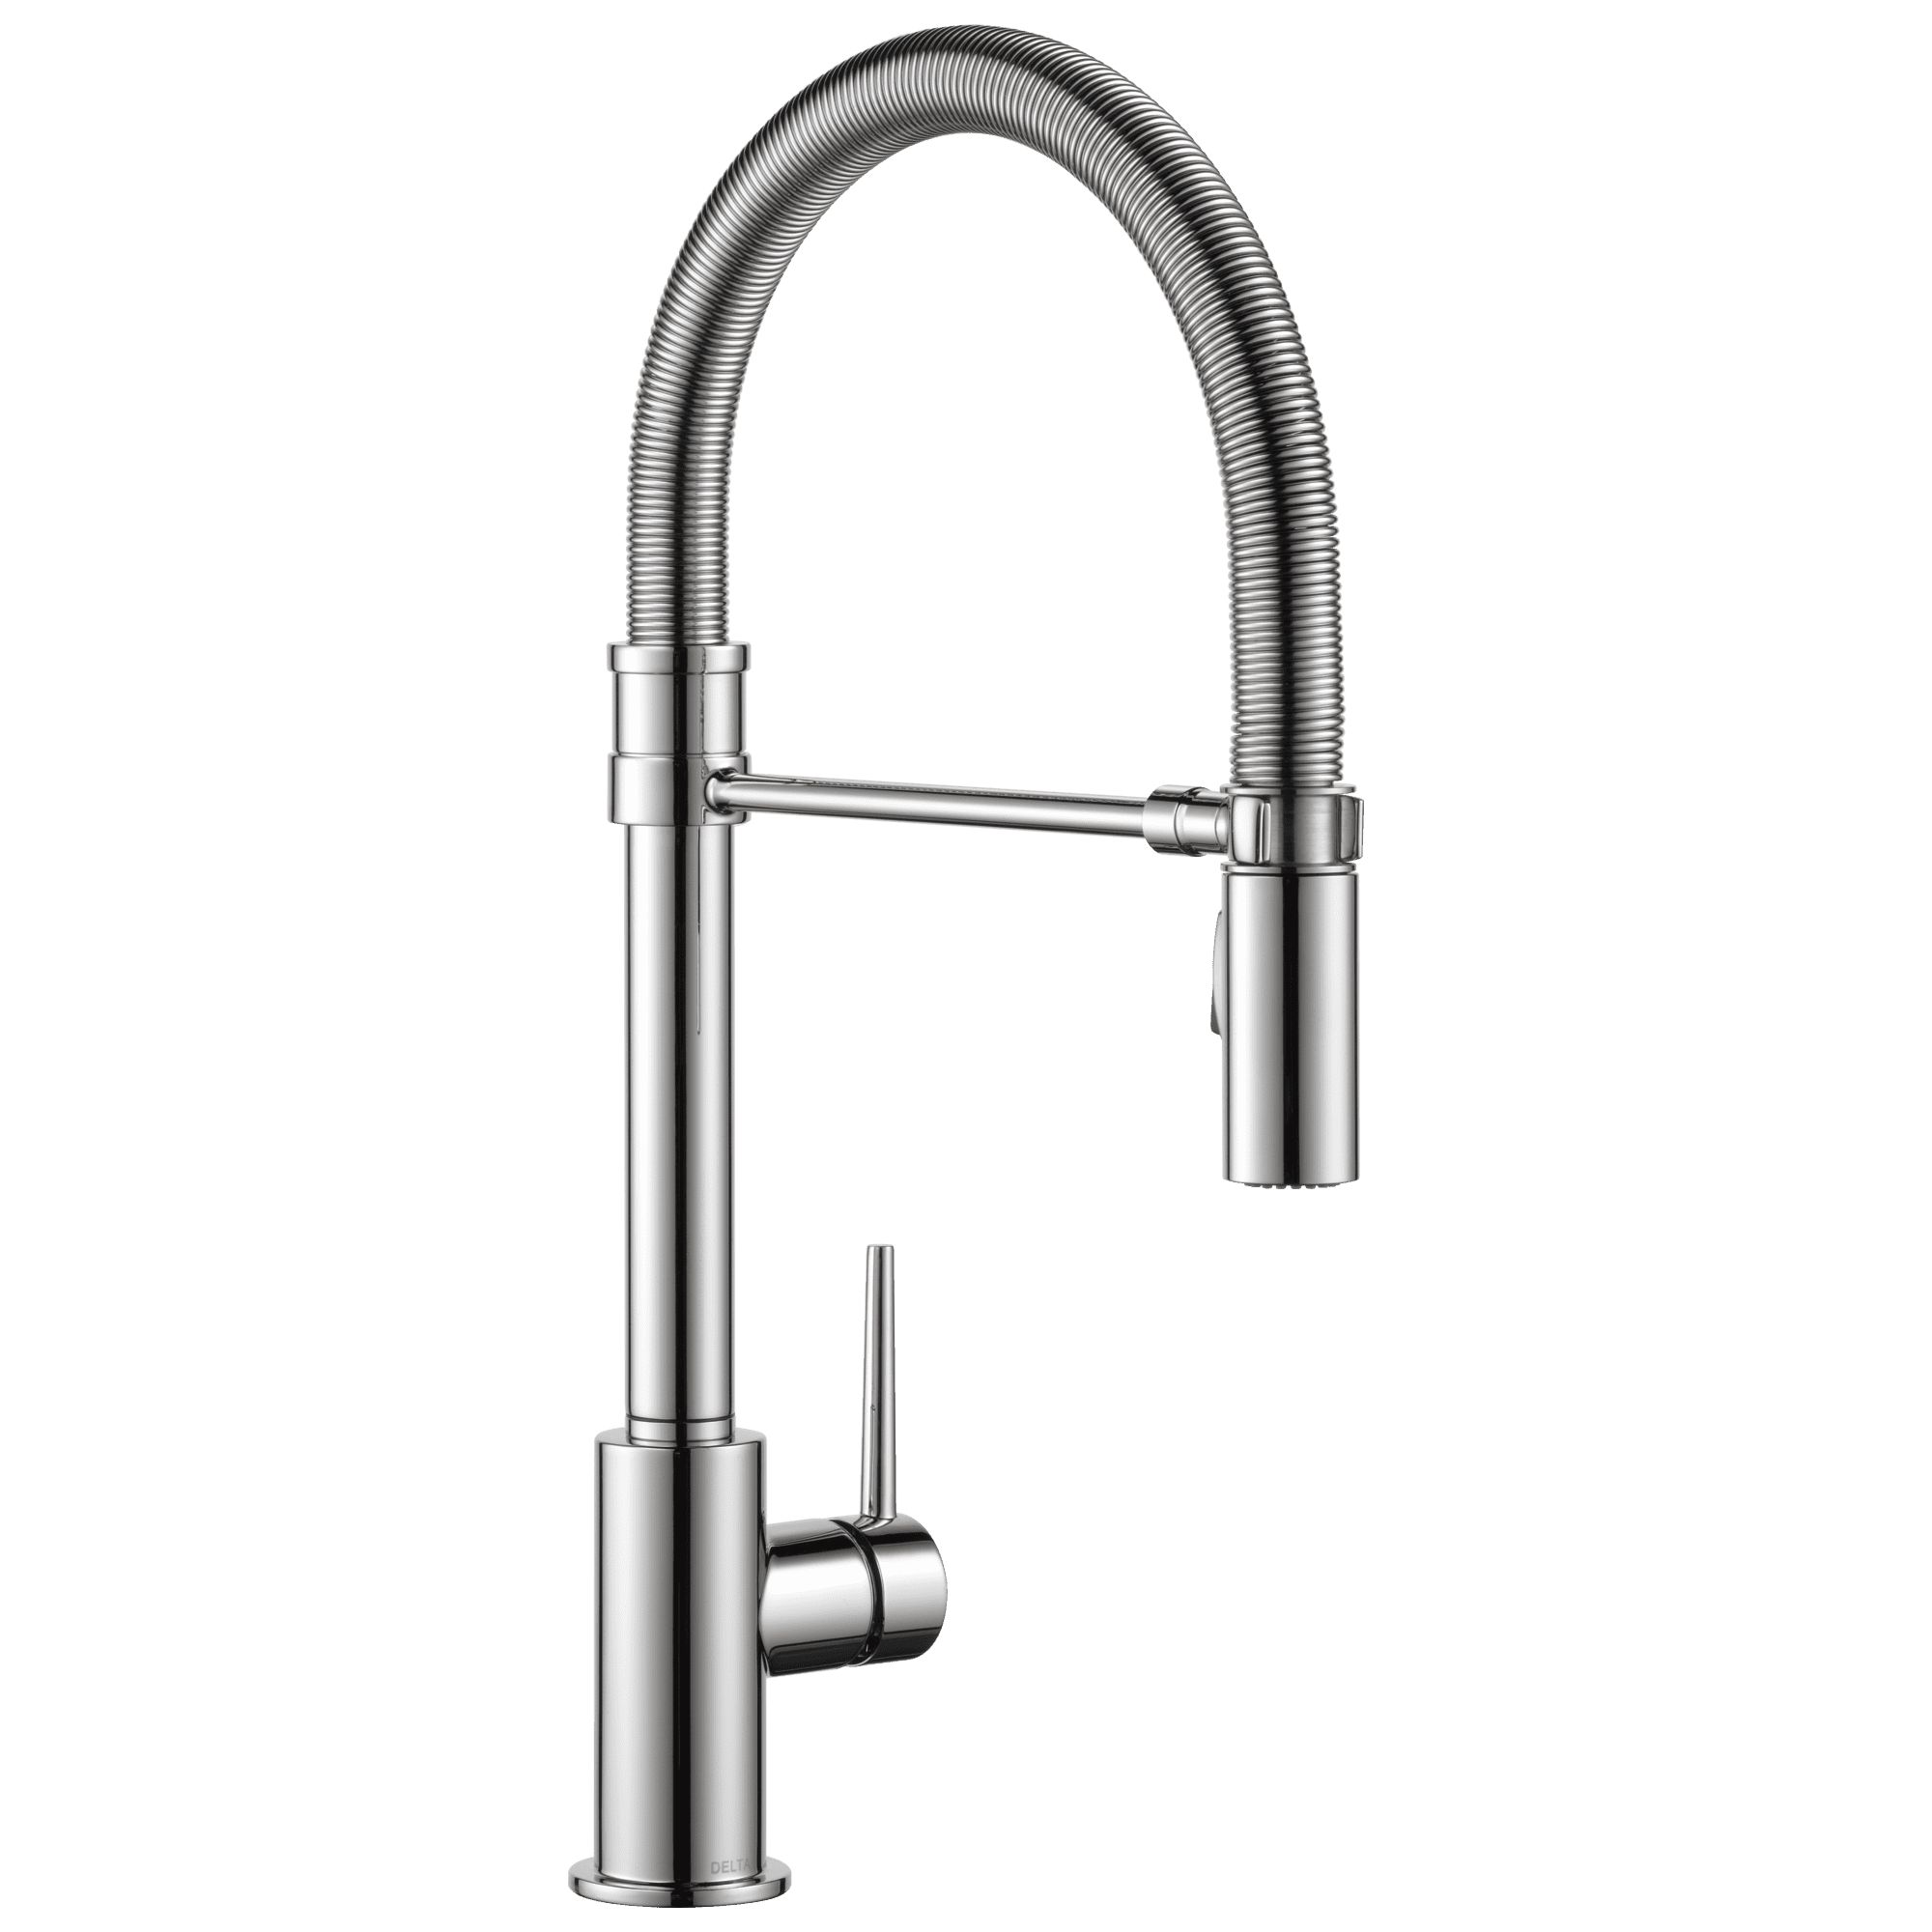 Sleek Chrome Pull-Down Kitchen Faucet with Magnetic Docking